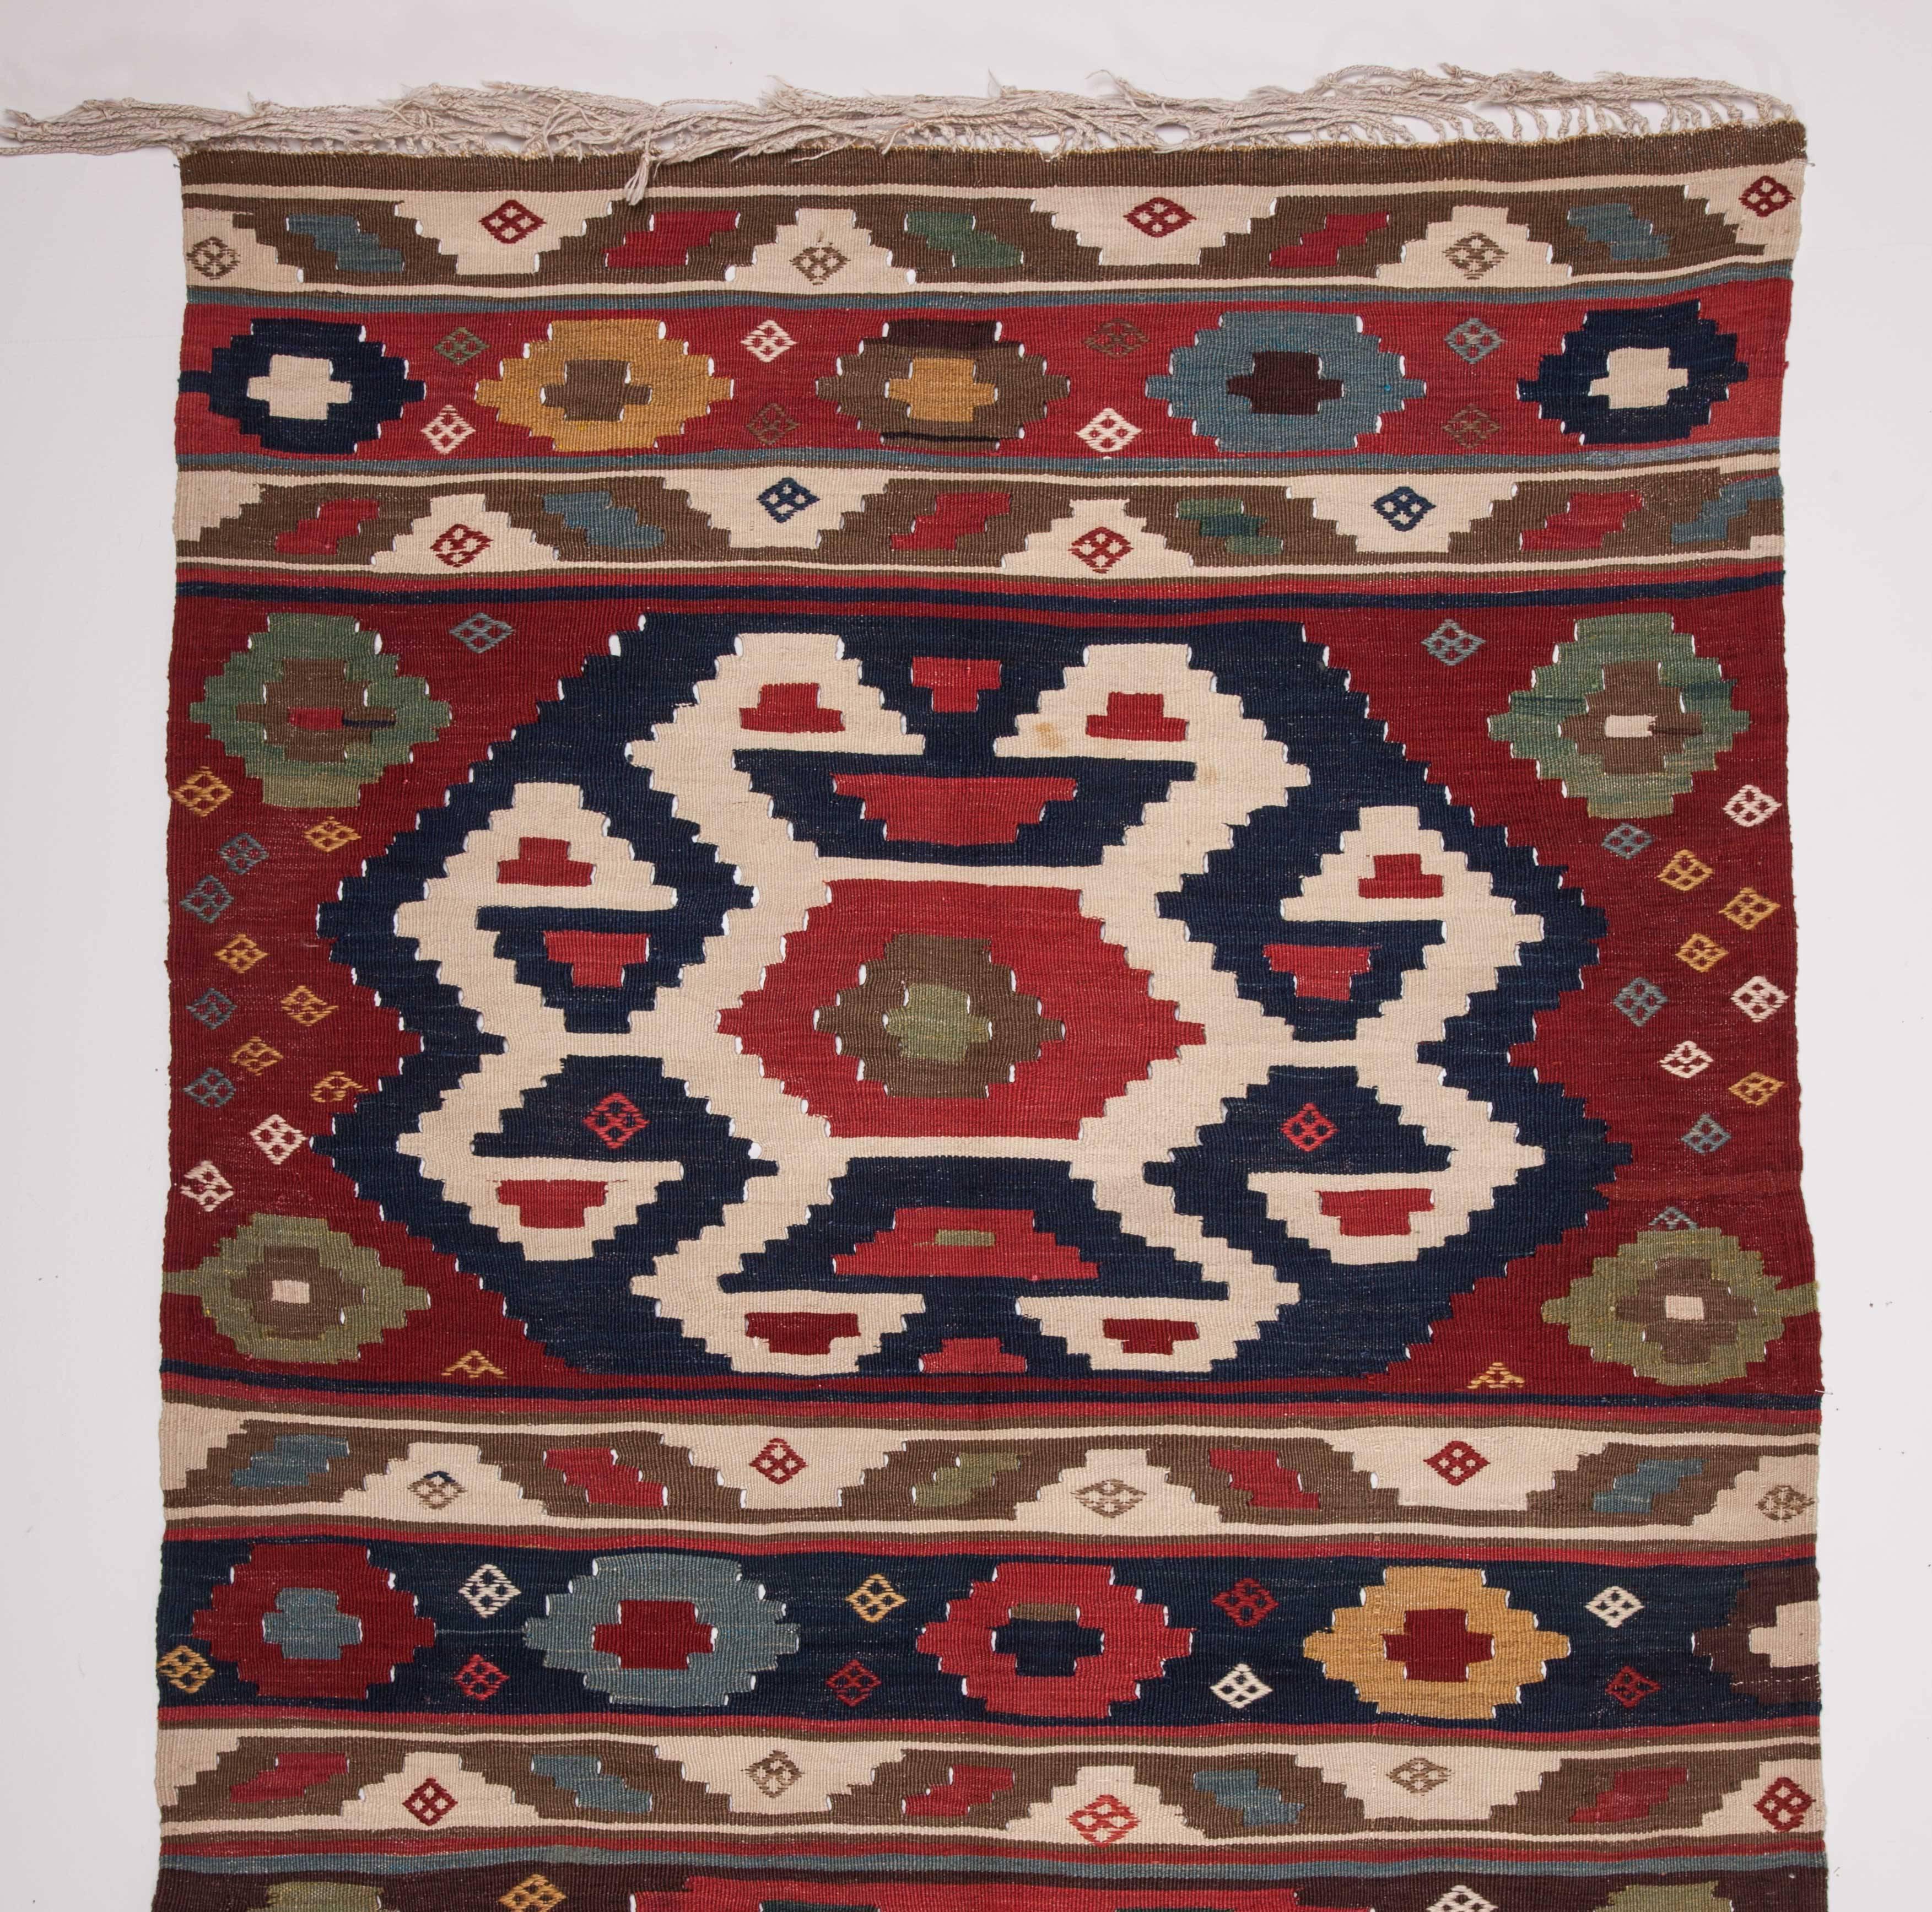 A great example in great condition with all natural dyes by Shahsavan of South Caucasus.